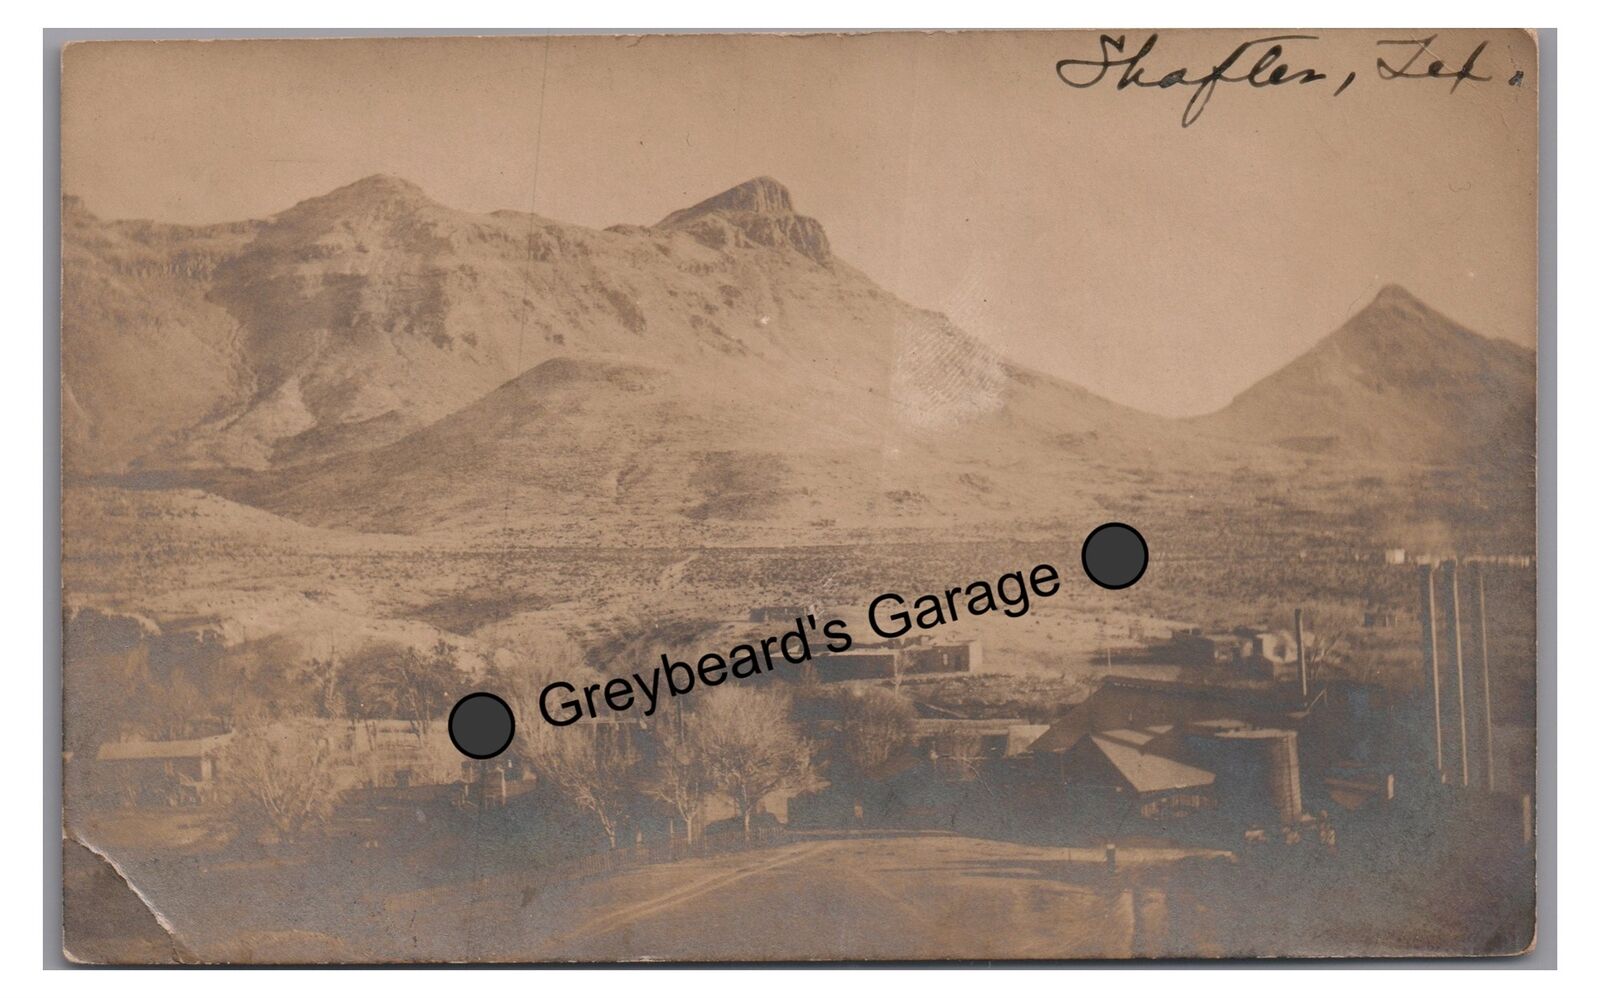 RPPC GHOST TOWN Aerial View SHAFTER TX Presidio County 1906 Real Photo Postcard